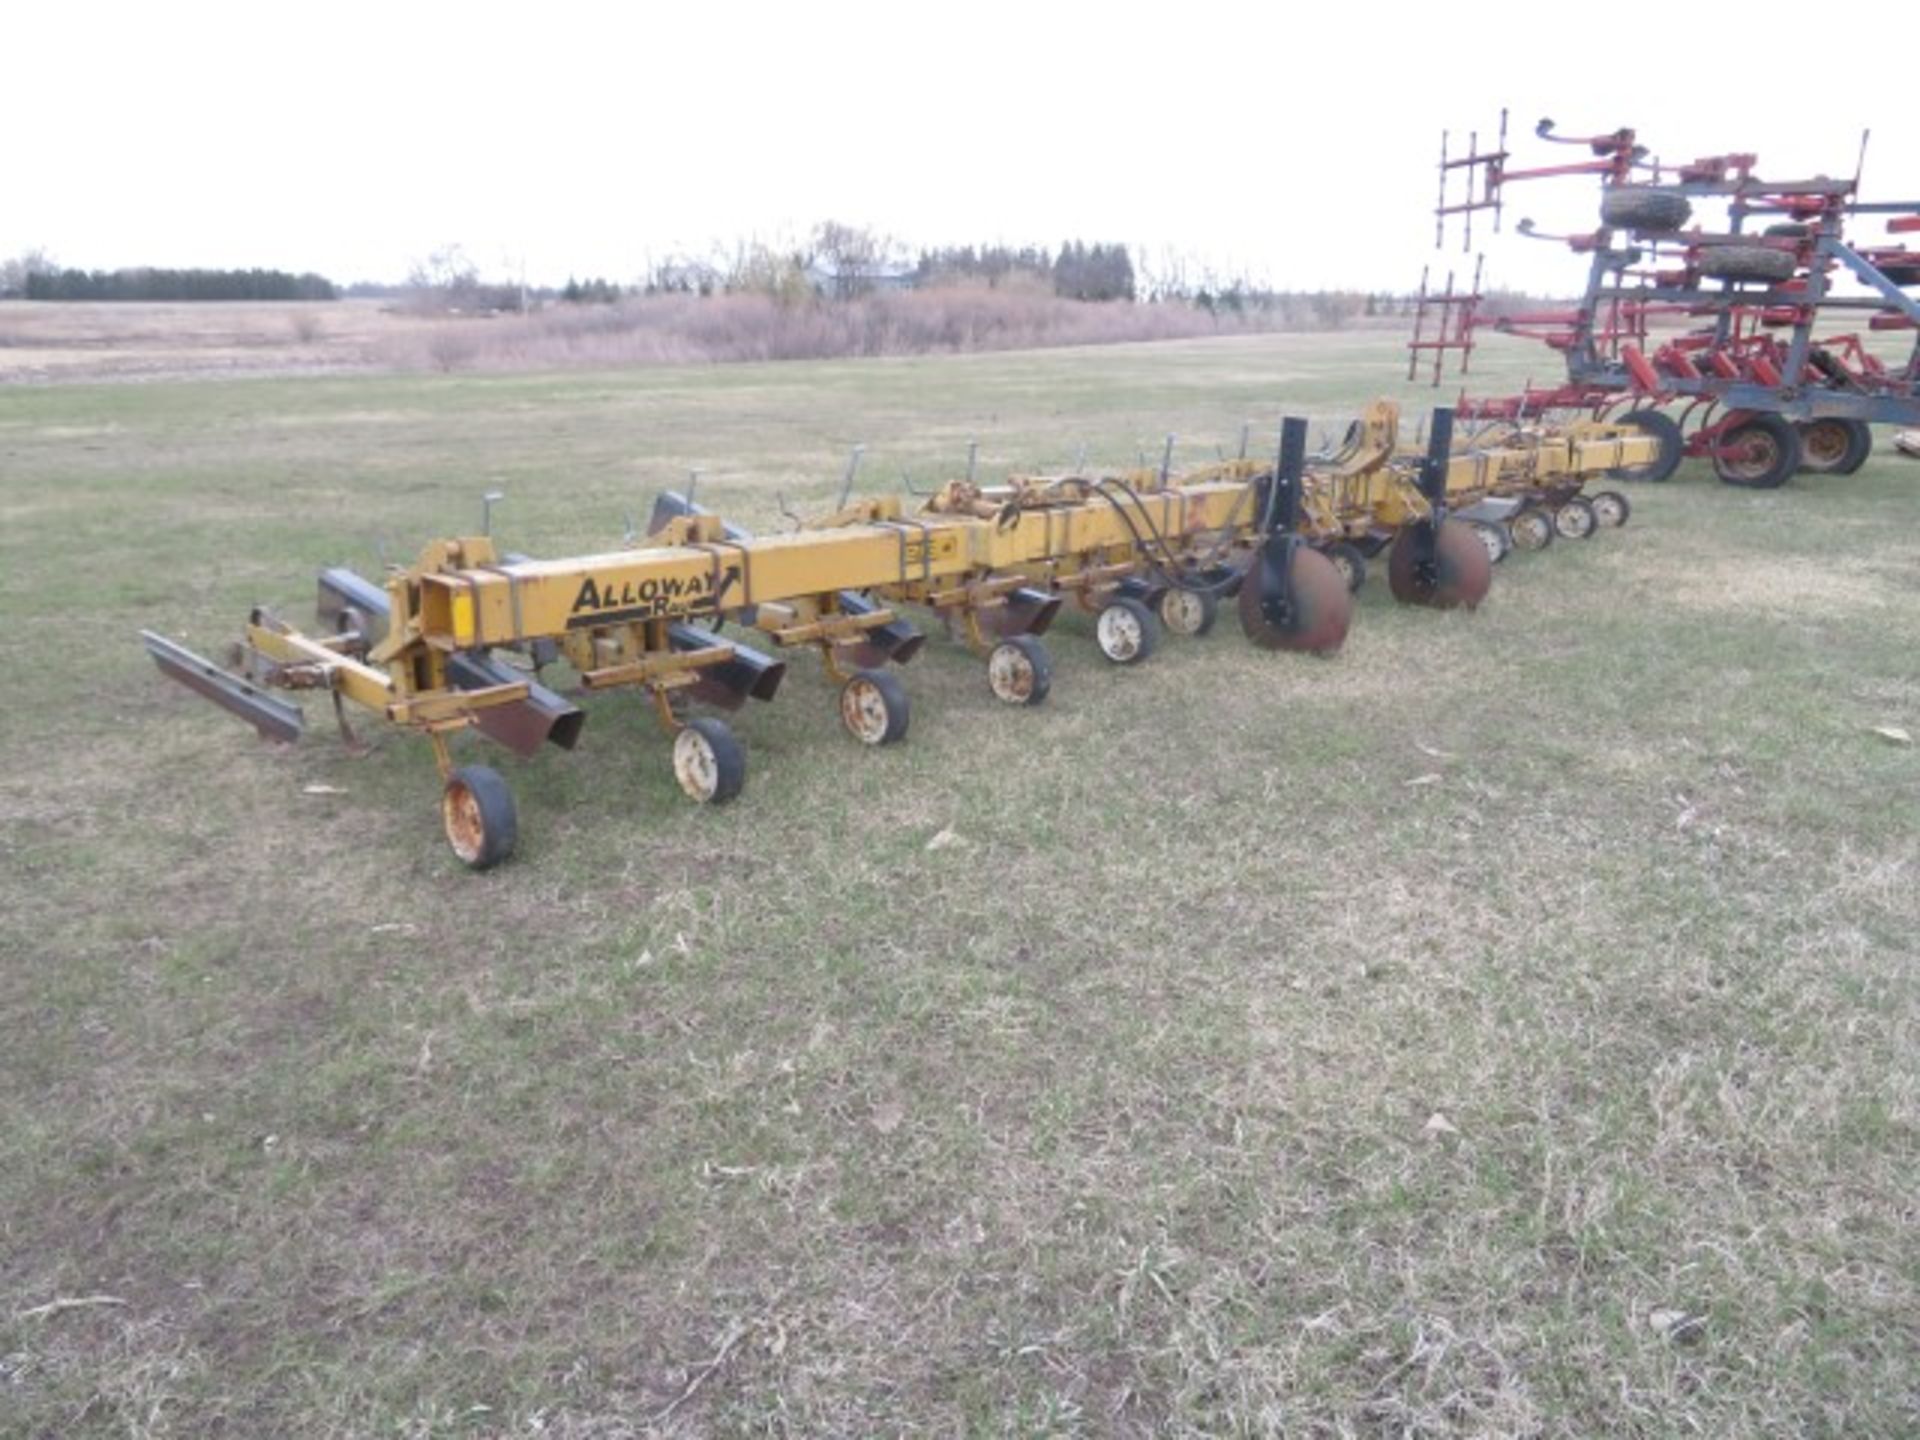 Alloway model 213, 5 s-tine row crop cultivator - Image 2 of 2